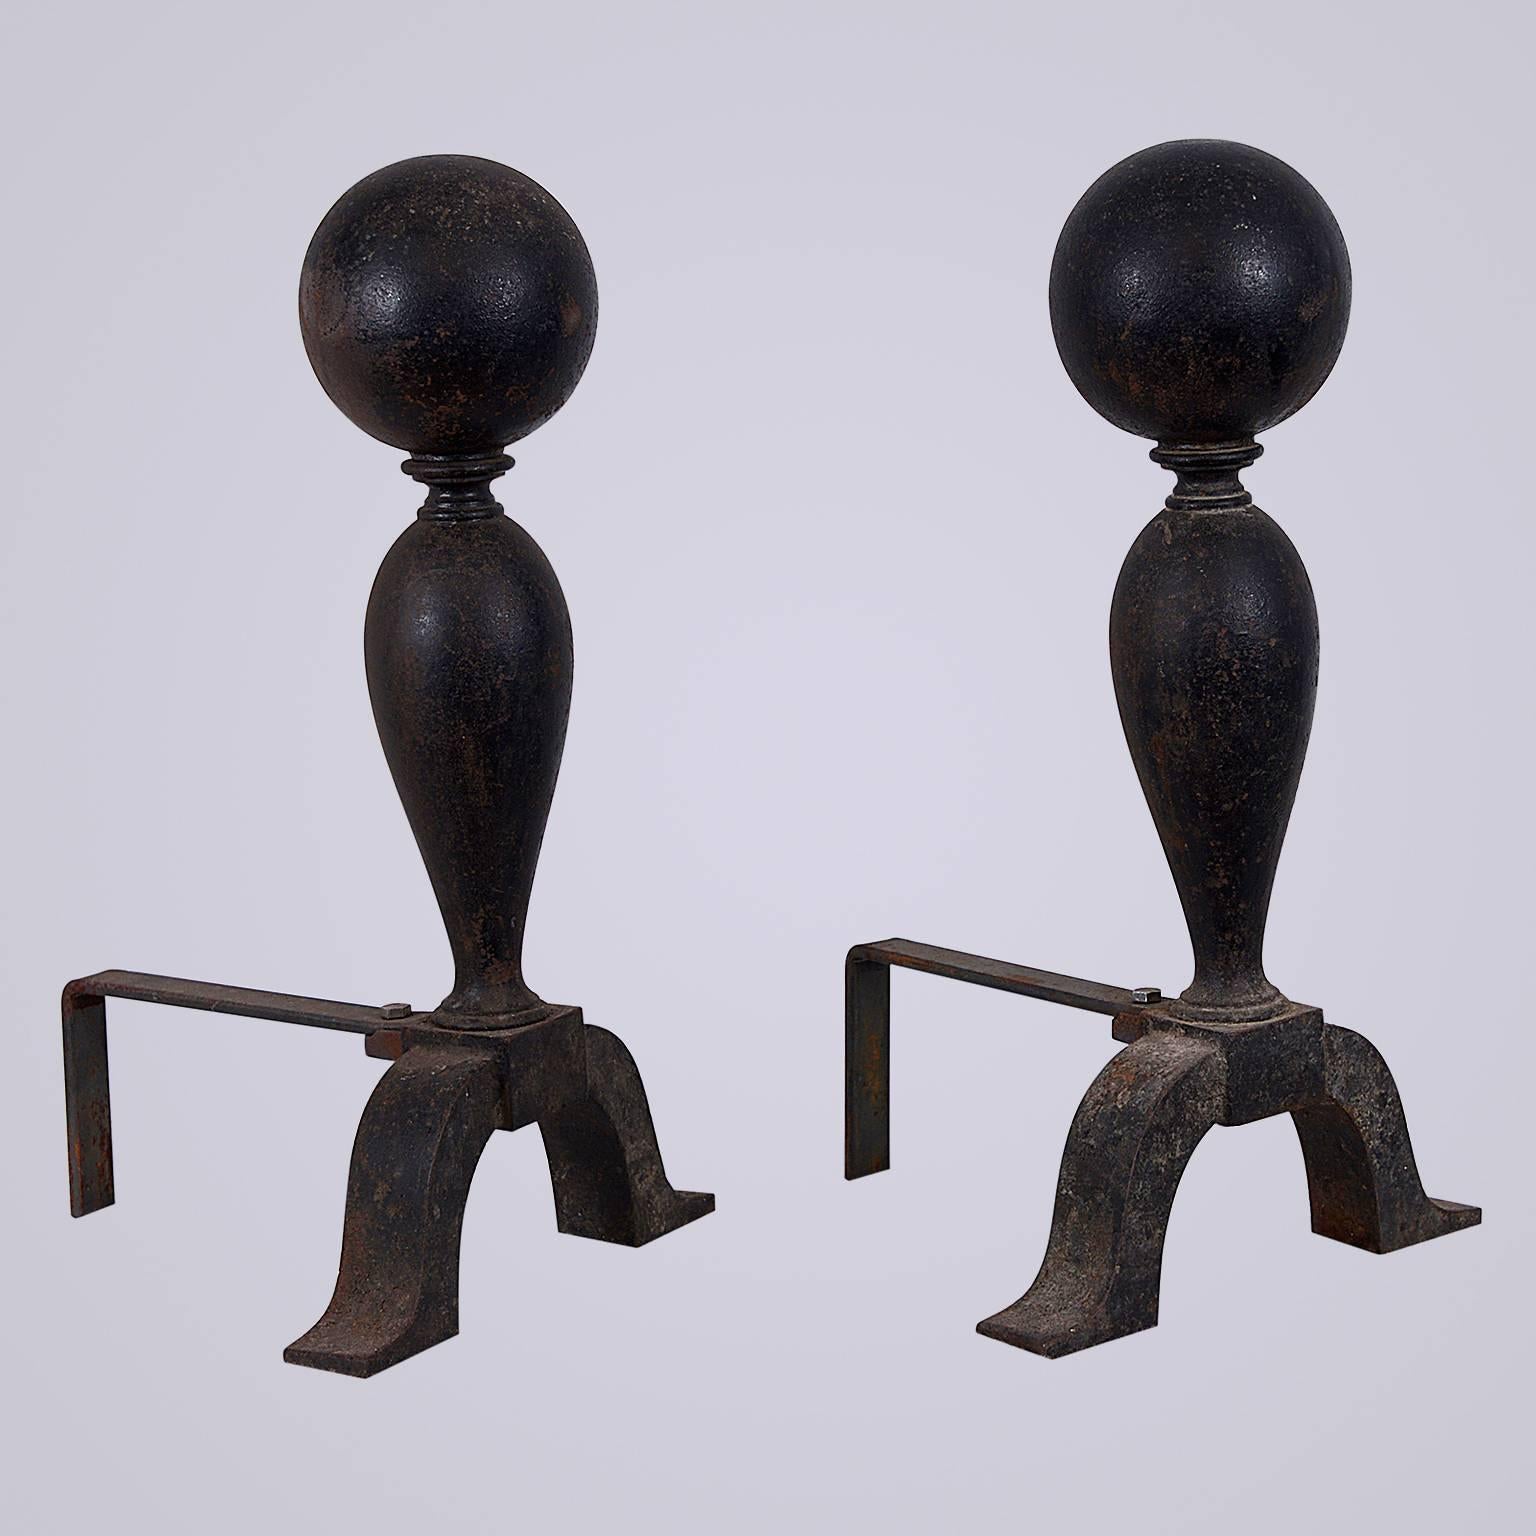 Early 20th century, Colonial style, cast iron cannonball andirons. Replacement log supports have been added to the back.